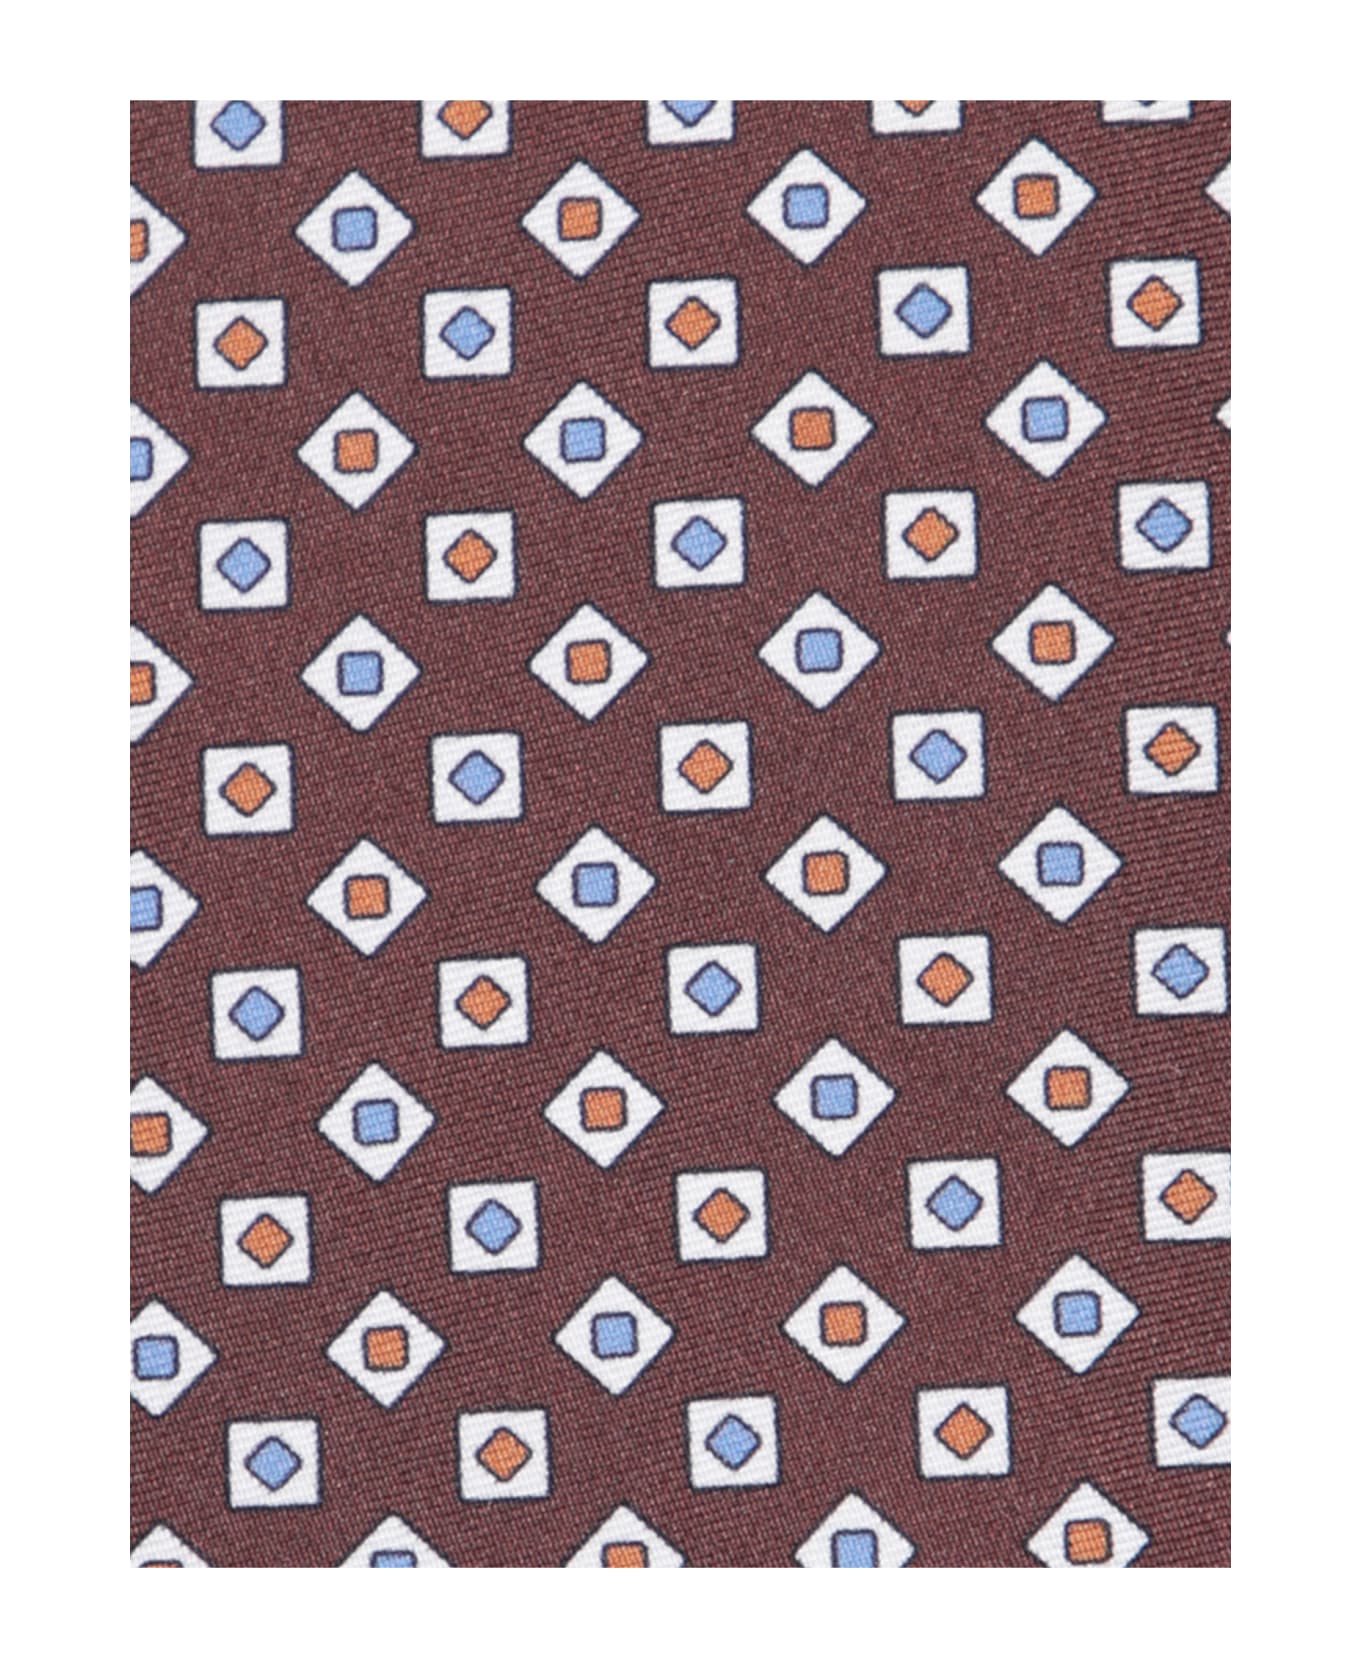 Canali Patterned Multicolor/brown Tie - Blue